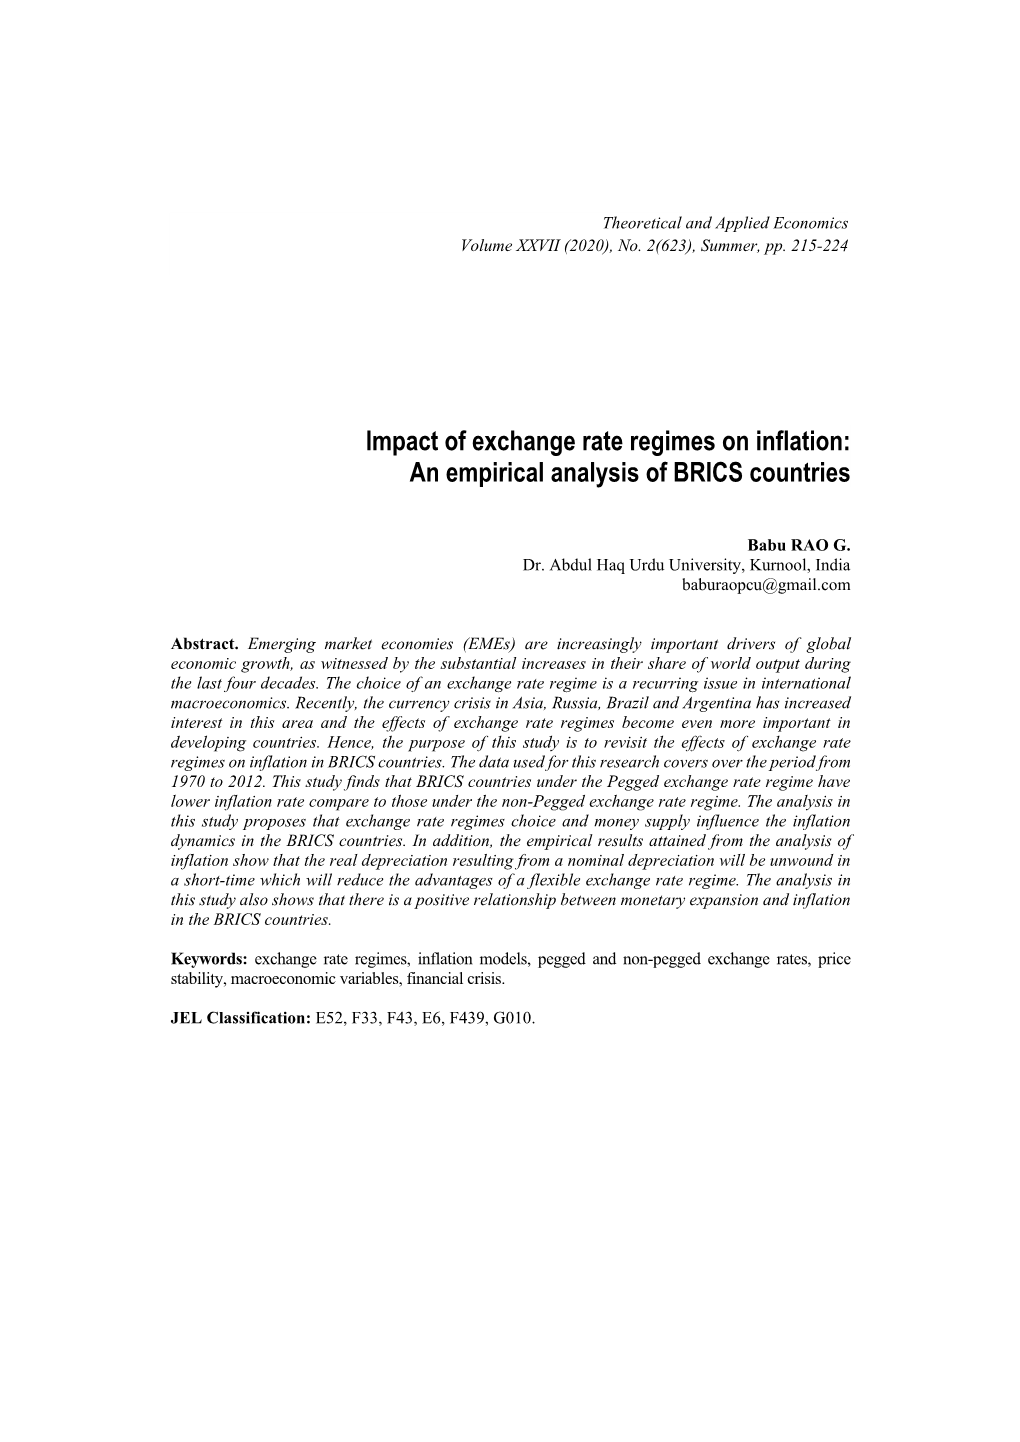 Impact of Exchange Rate Regimes on Inflation: an Empirical Analysis of BRICS Countries